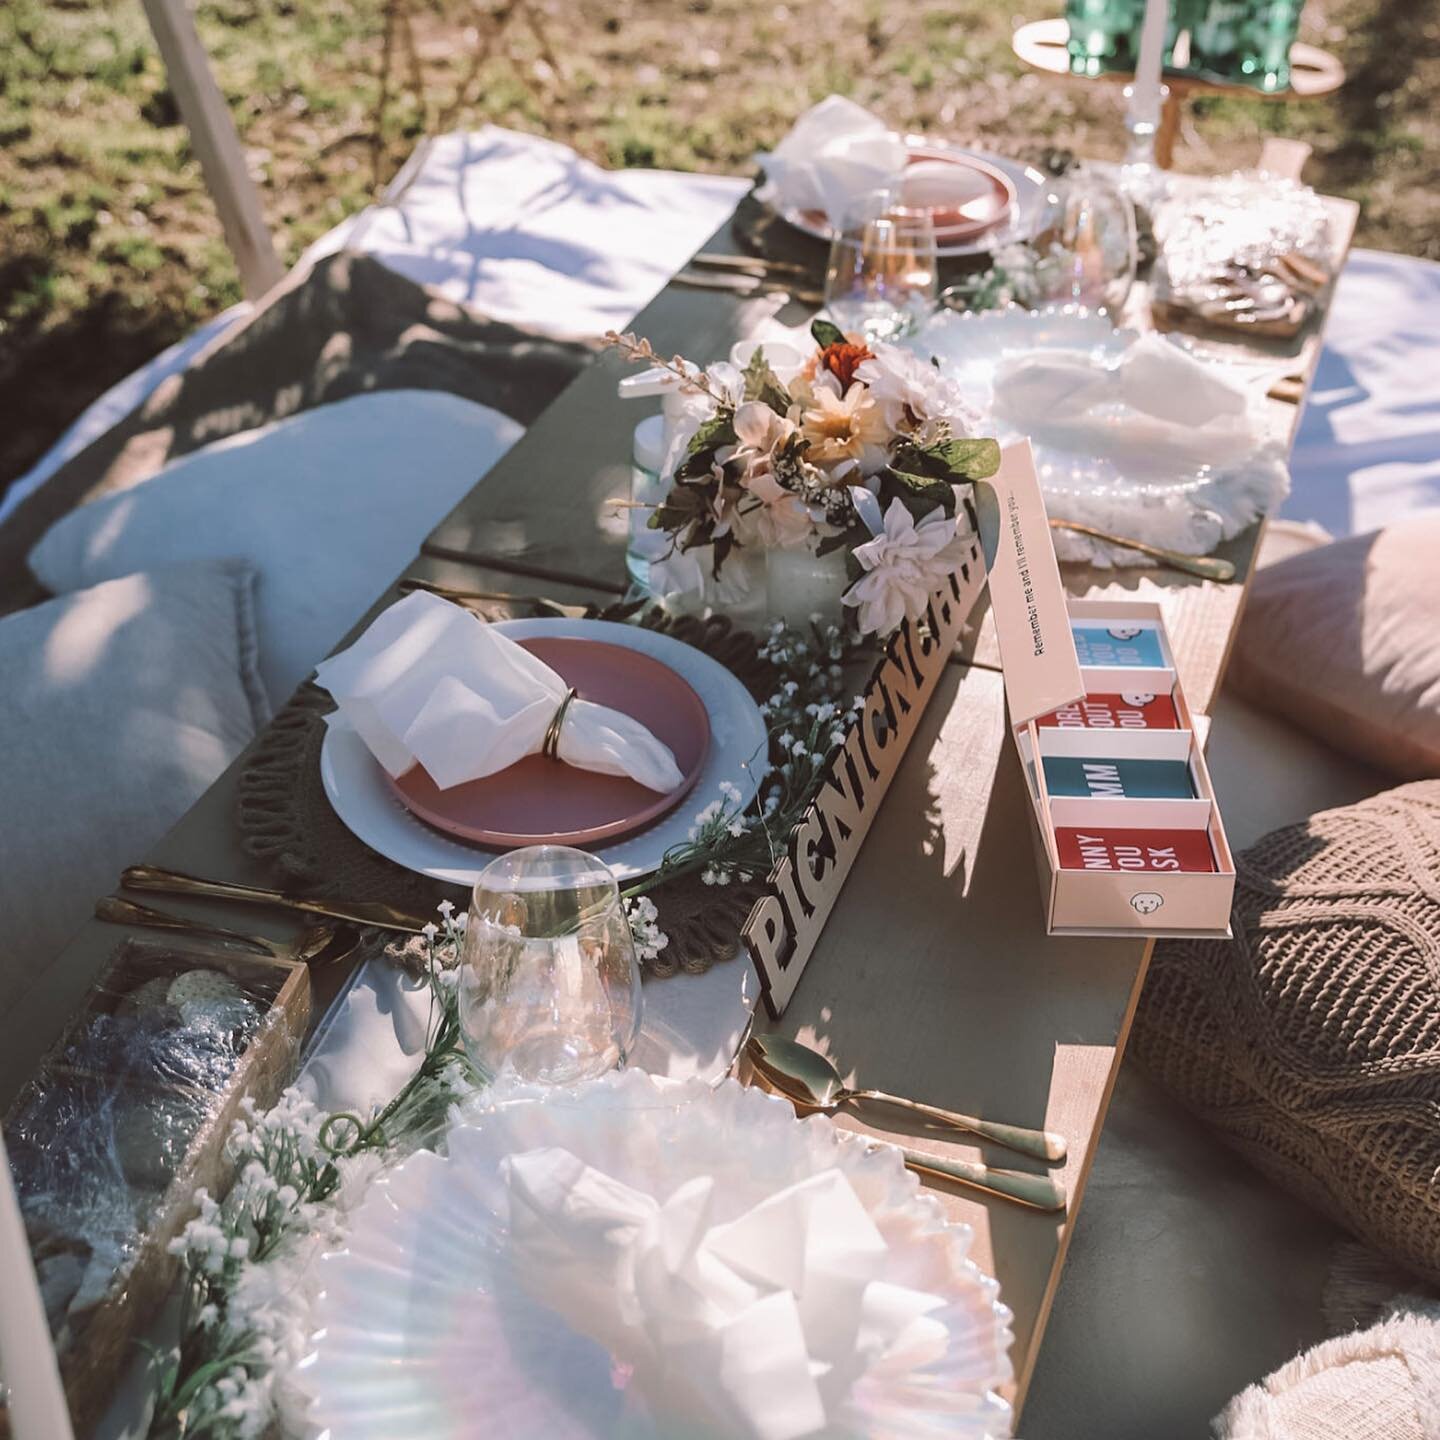 picnic date with the girls &gt; 👯&zwj;♀️🥂🎨

For bookings for 2 or more guest, Please submit a large group reservation on our website!  We do offer payment plans for our picnic bookings. 

#picnic #sfpicnic #luxurypicnic #bayareaevents #eventplanne